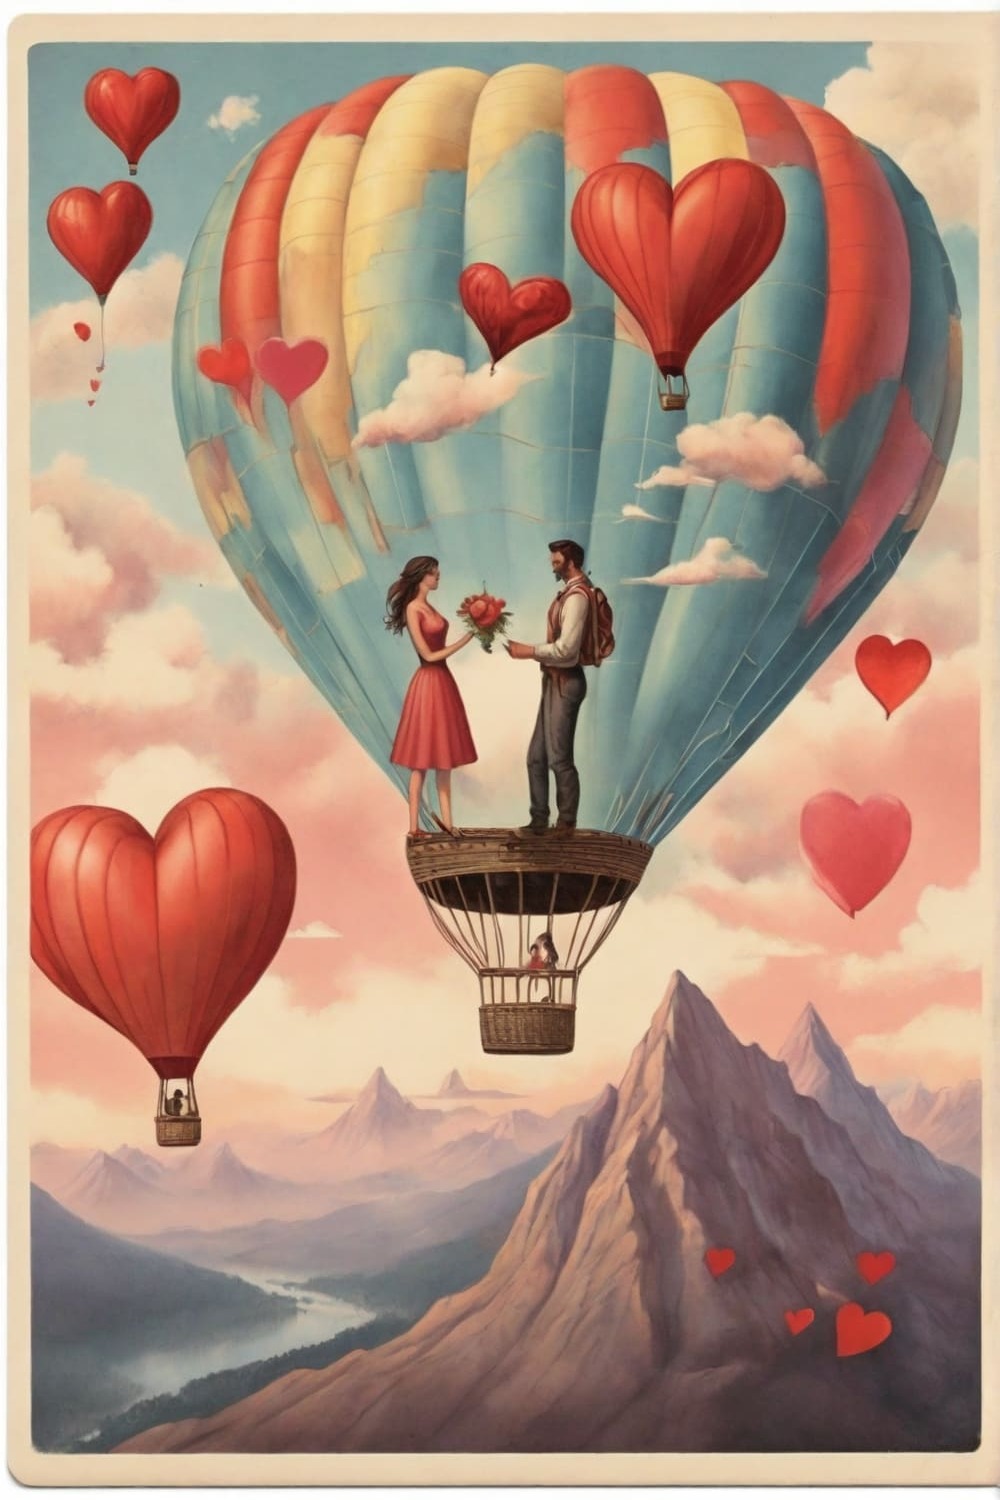 postcard, hot air balloon, man, woman, mountains, hearts in the air pinterest preview image.